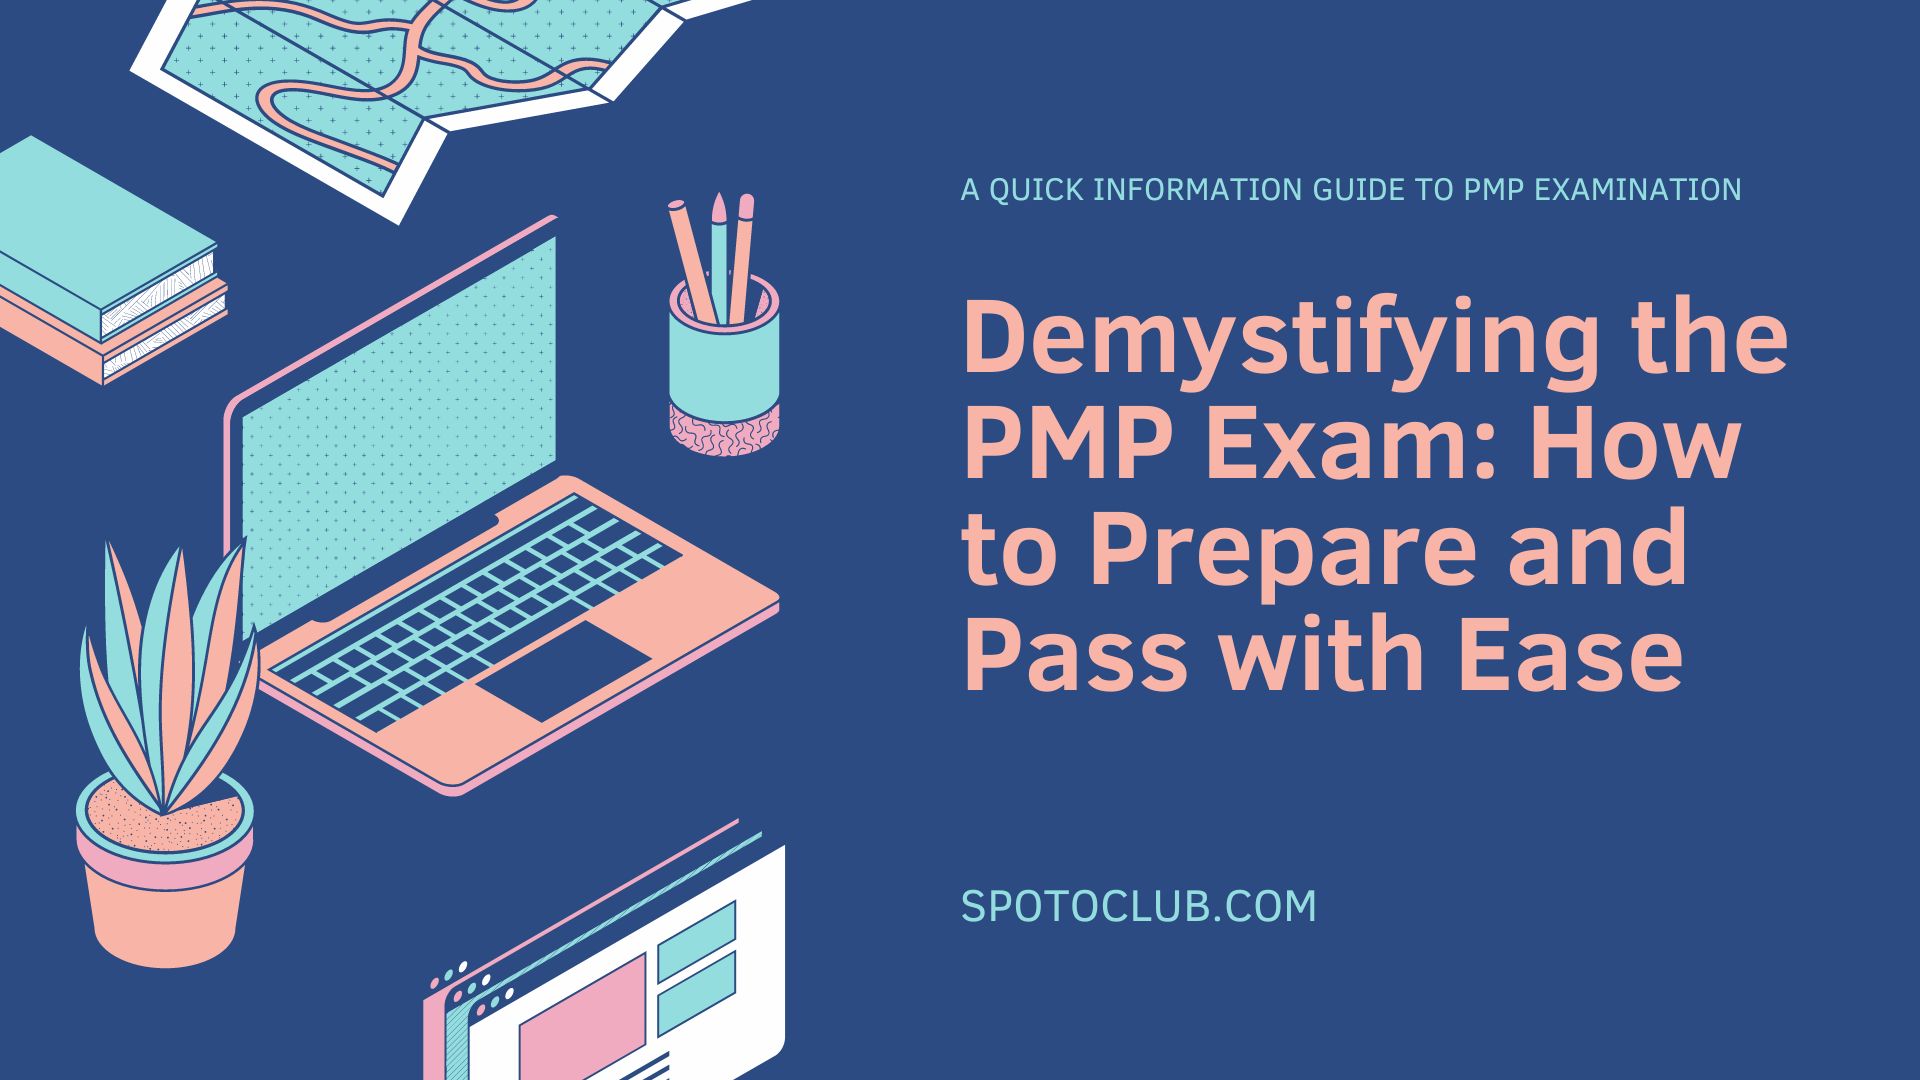 Demystifying the PMP Exam